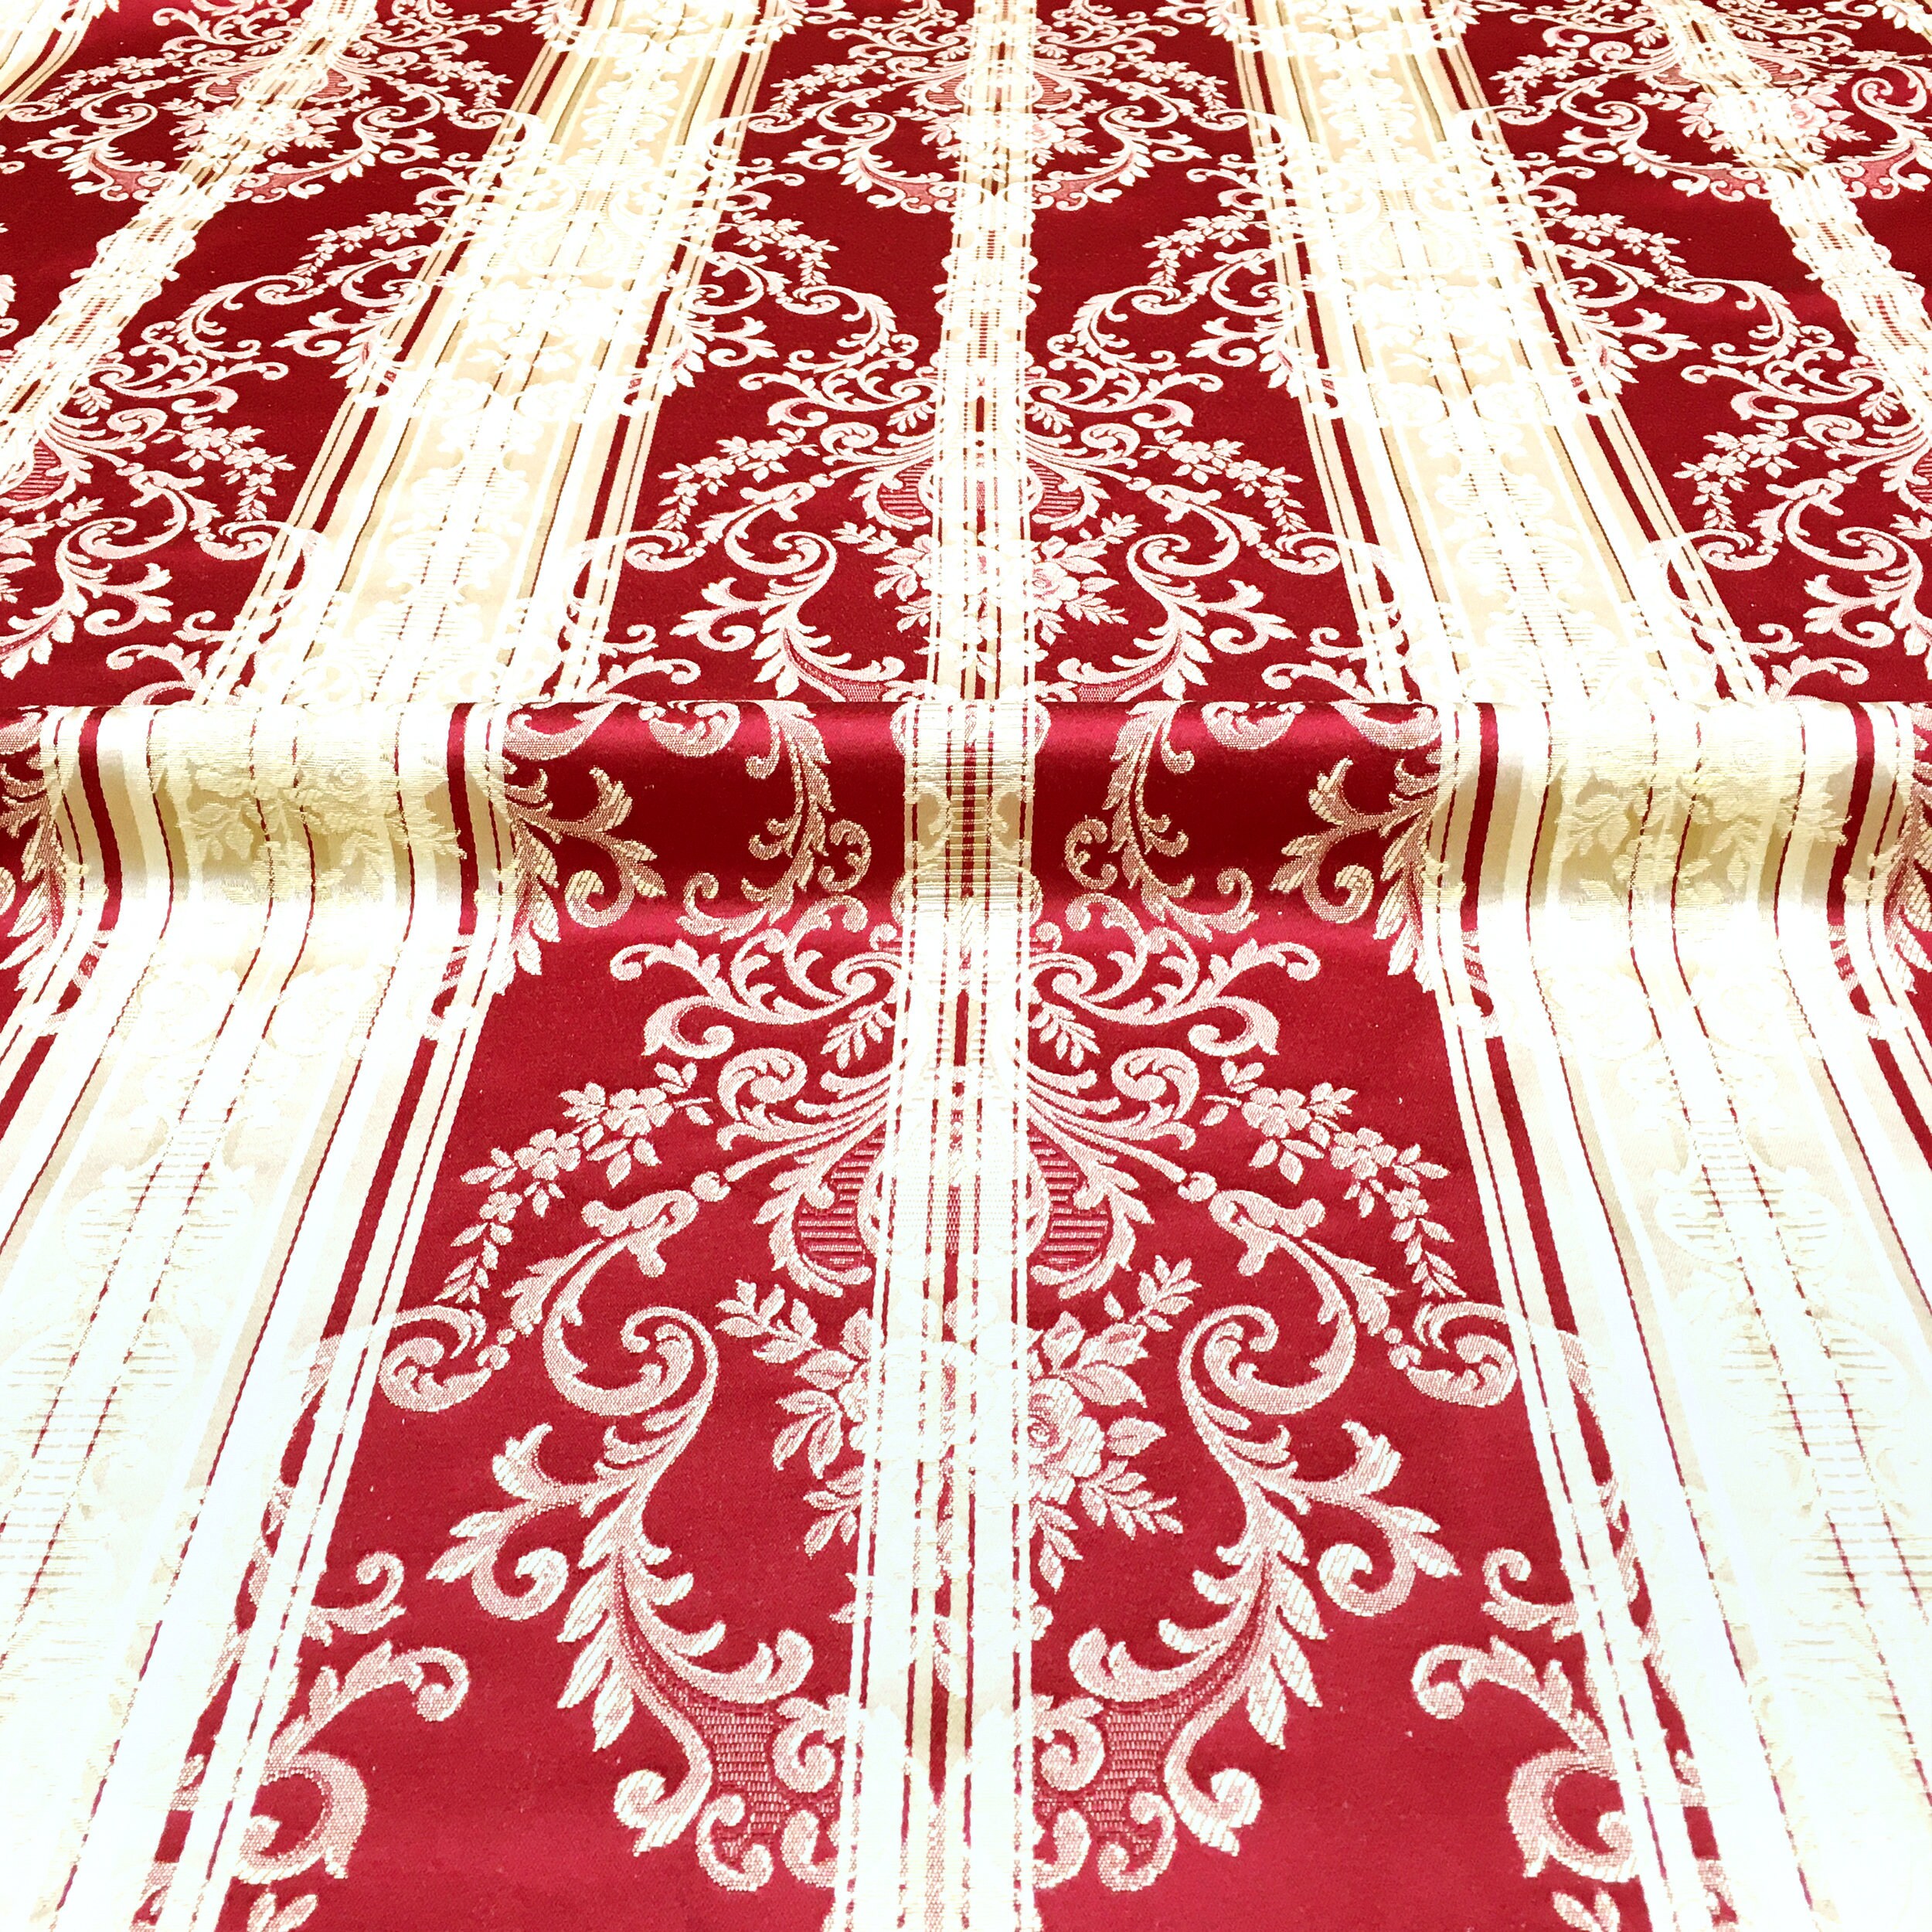 Red Damask Printed Velvet Fabric by the Yard,velvet Fabric With Gold  Print,printed Velvet Fabric by the Yard,upholstery Fabric,curtain Fabri 